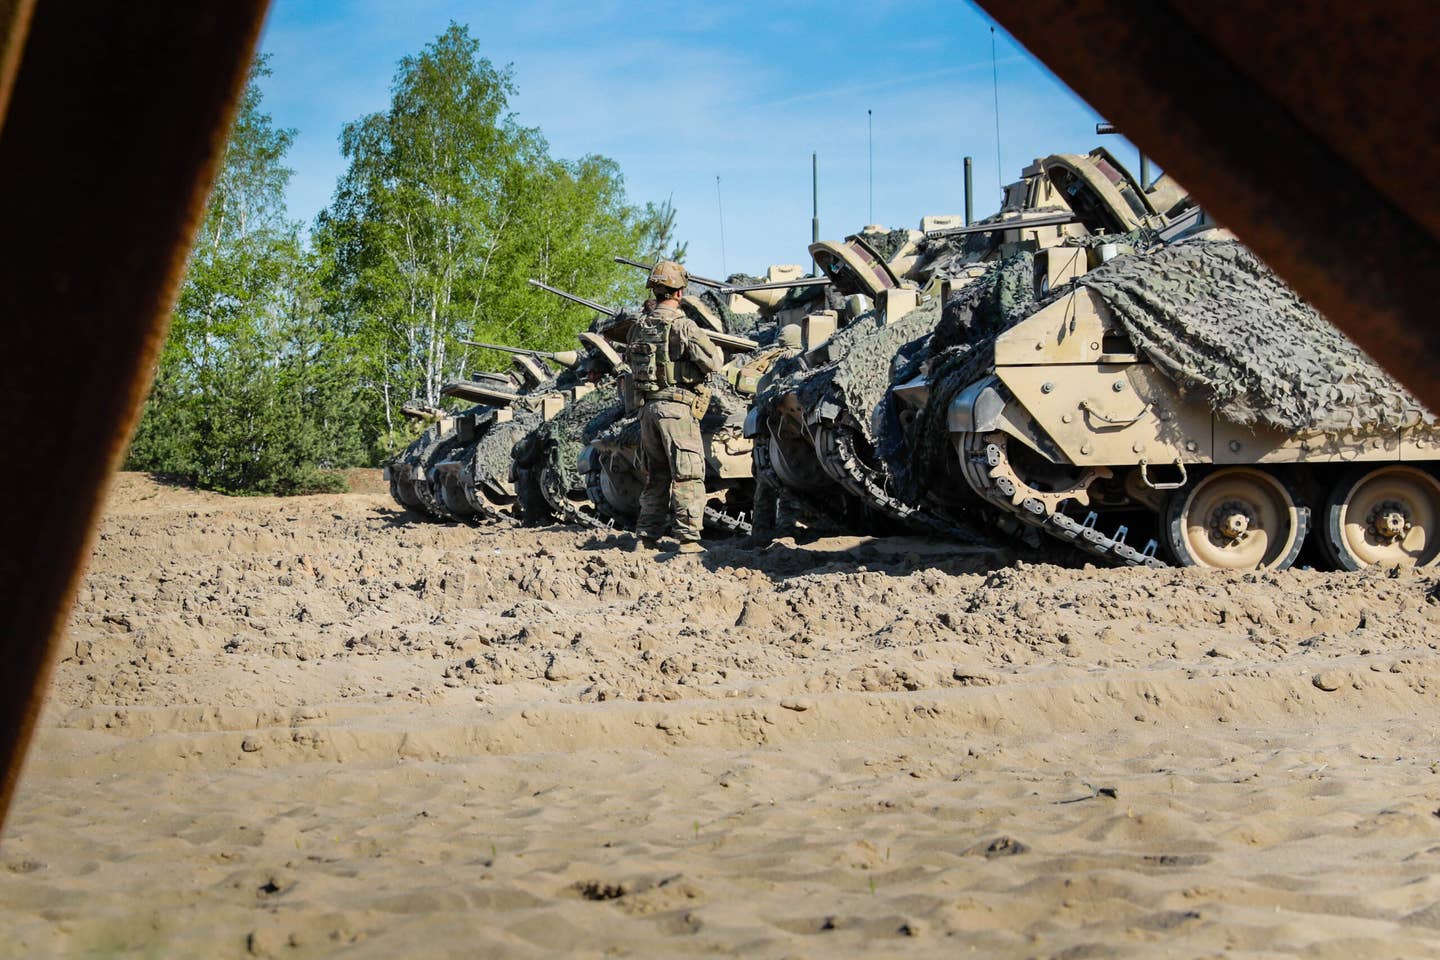 U.S. soldiers arrive on their assigned M2A3 Bradley fighting vehicles prior to live demolition training as part of Defender 22 at Oberlausitz Training Area, Germany, May 10, 2022. <em>Credit: U.S. Army National Guard photo by Staff Sgt. Gabriel Rivera</em>